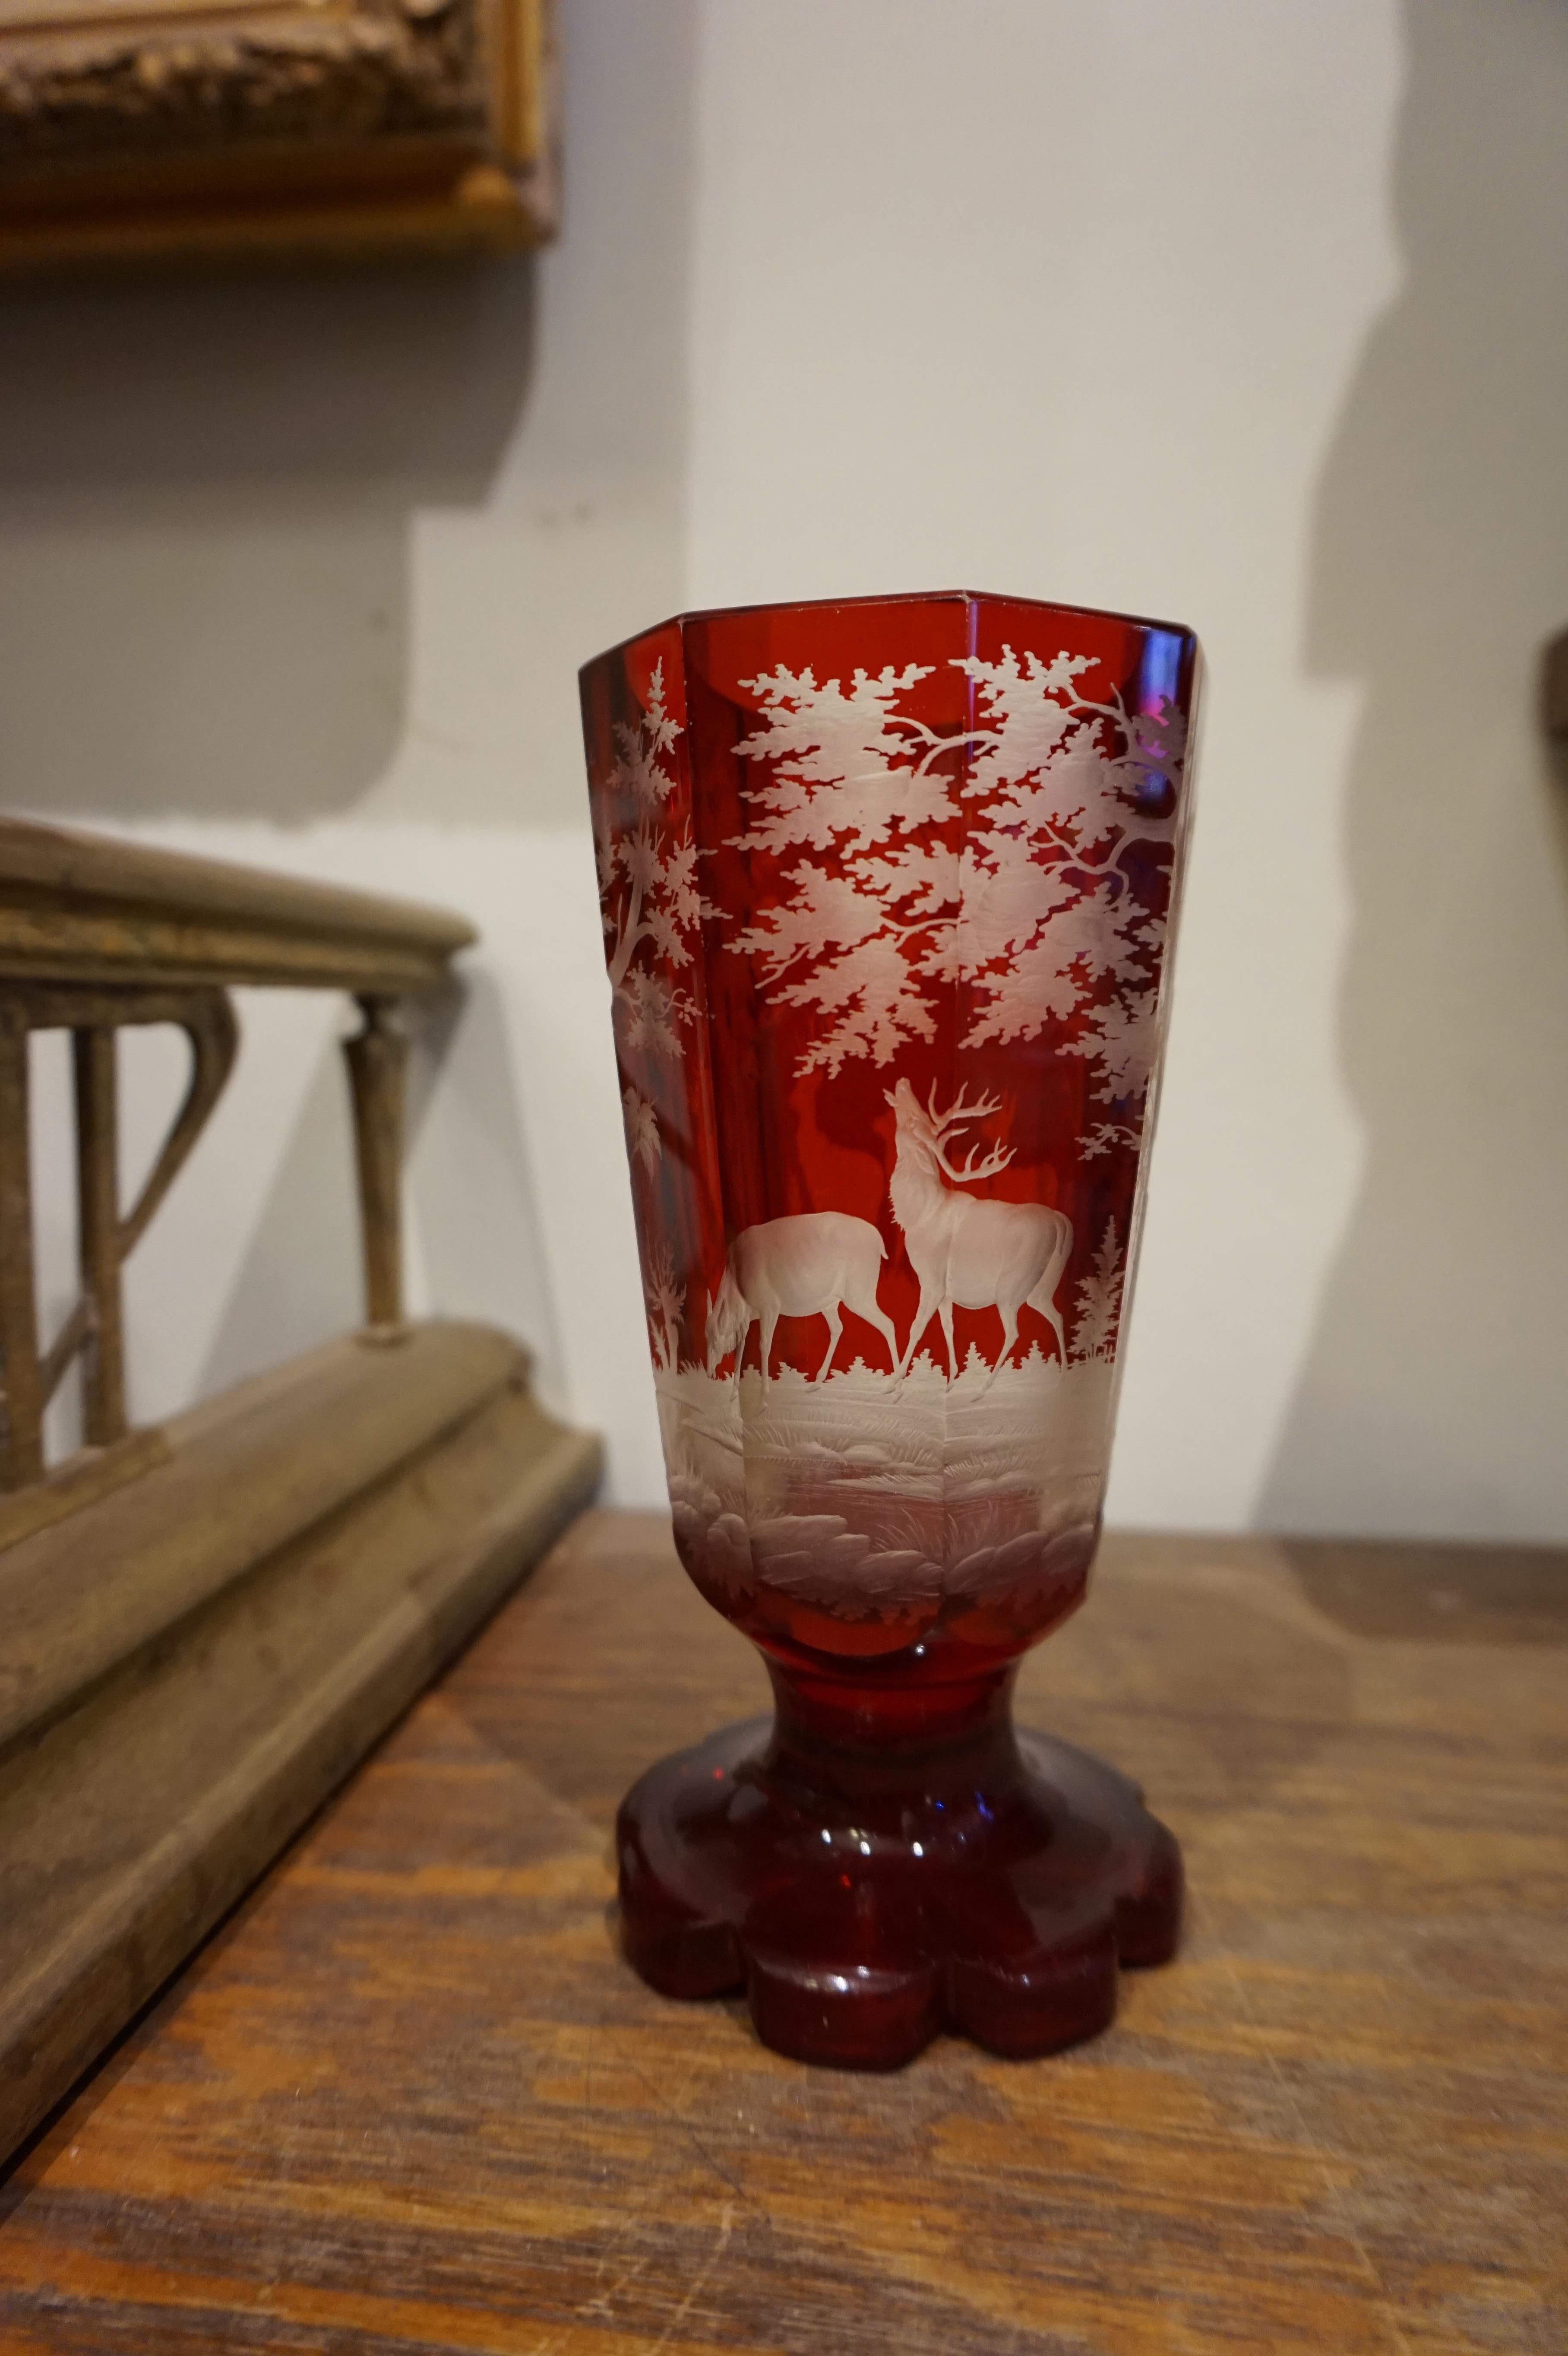 Beautifully hand etched deer in the wilderness scene in Ruby red Crystal. Great details and fine workmanship shines through. Good original condition.